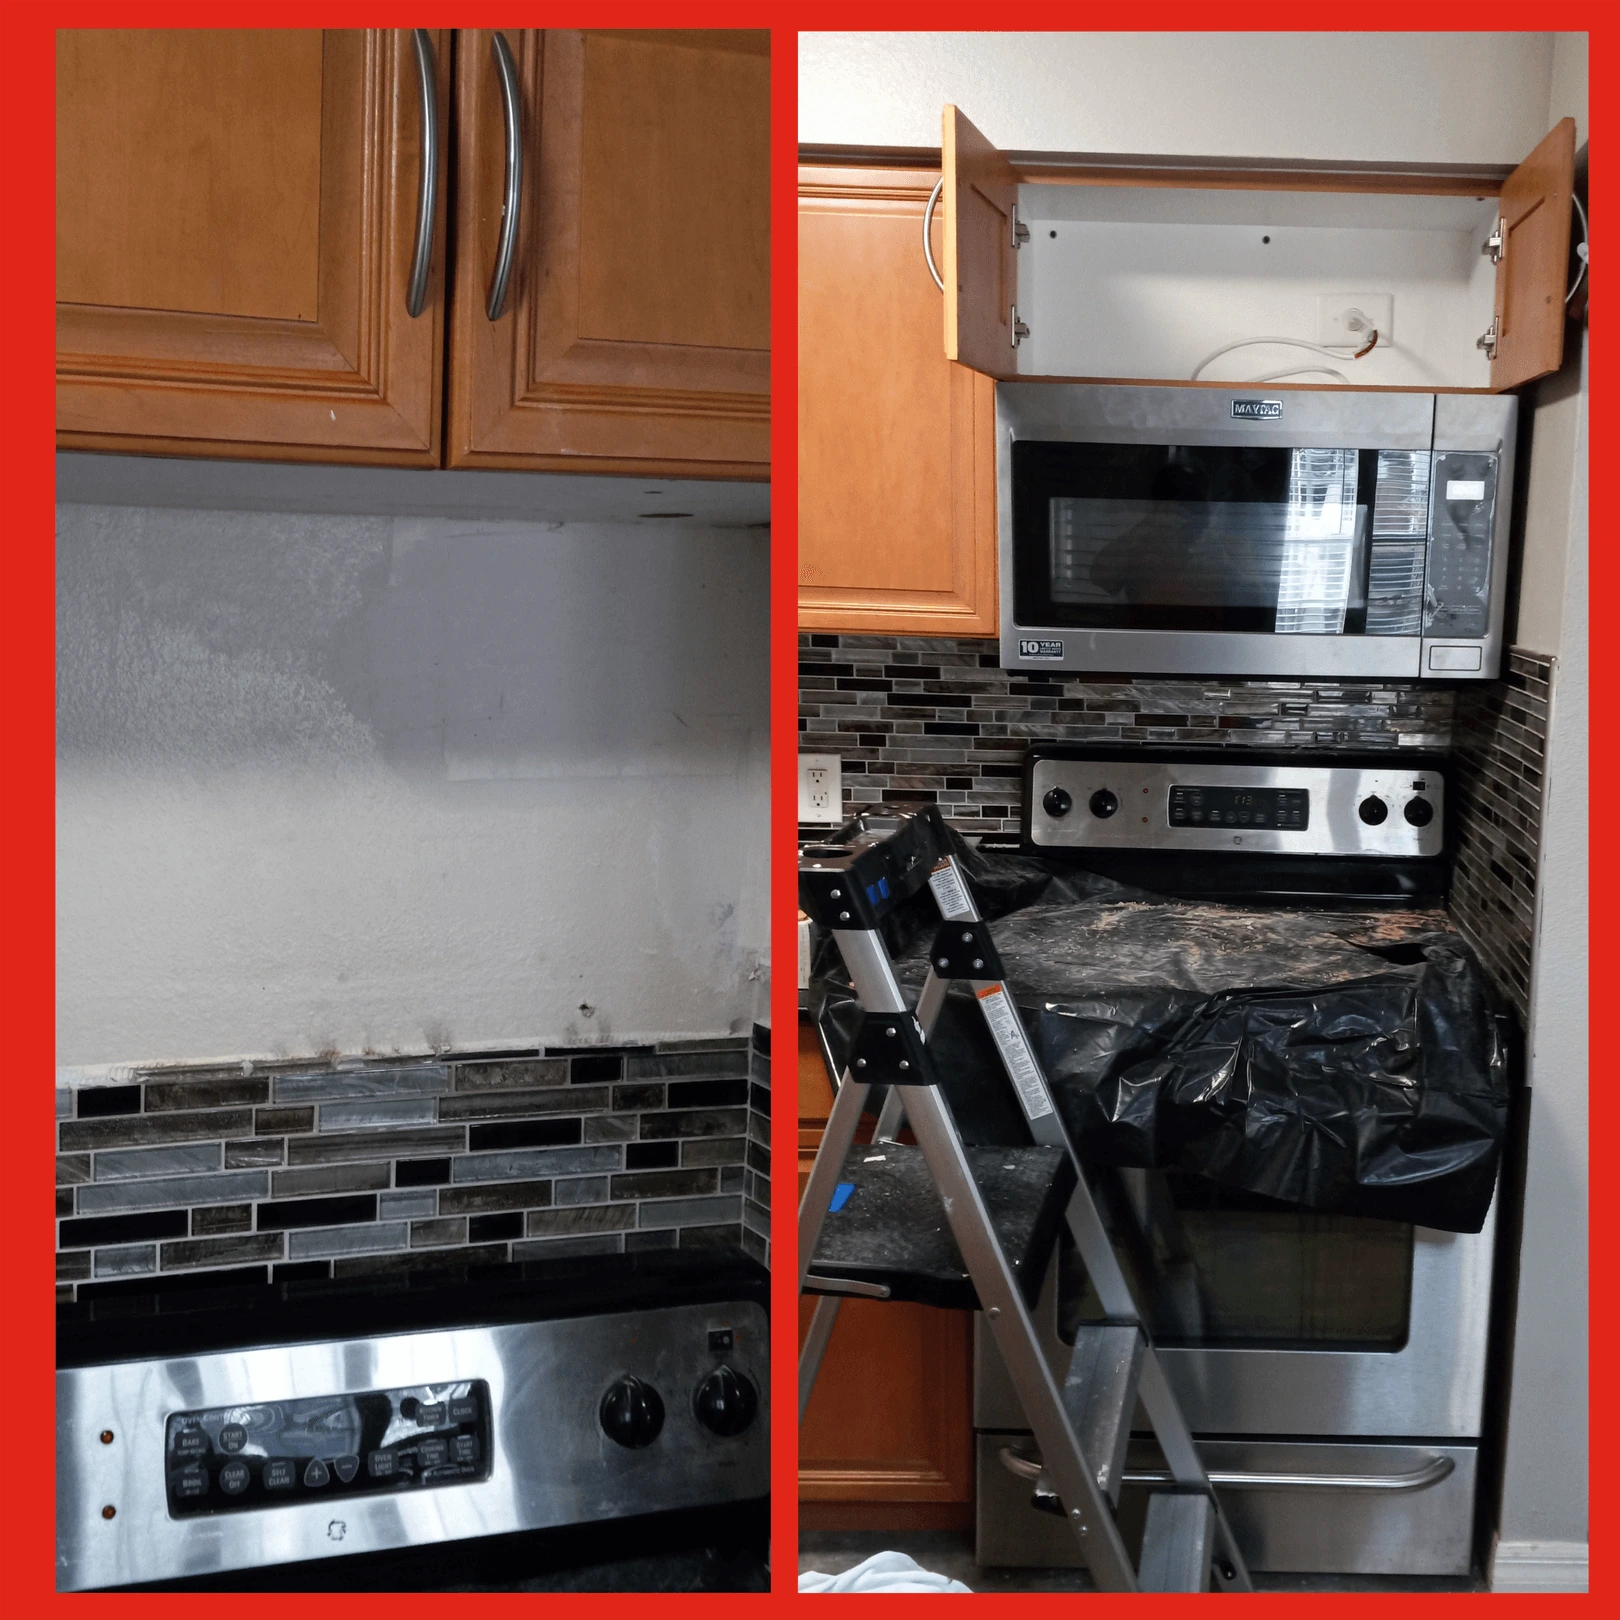 A kitchen remodeling project with backsplash installation completed by Mr. Handyman.